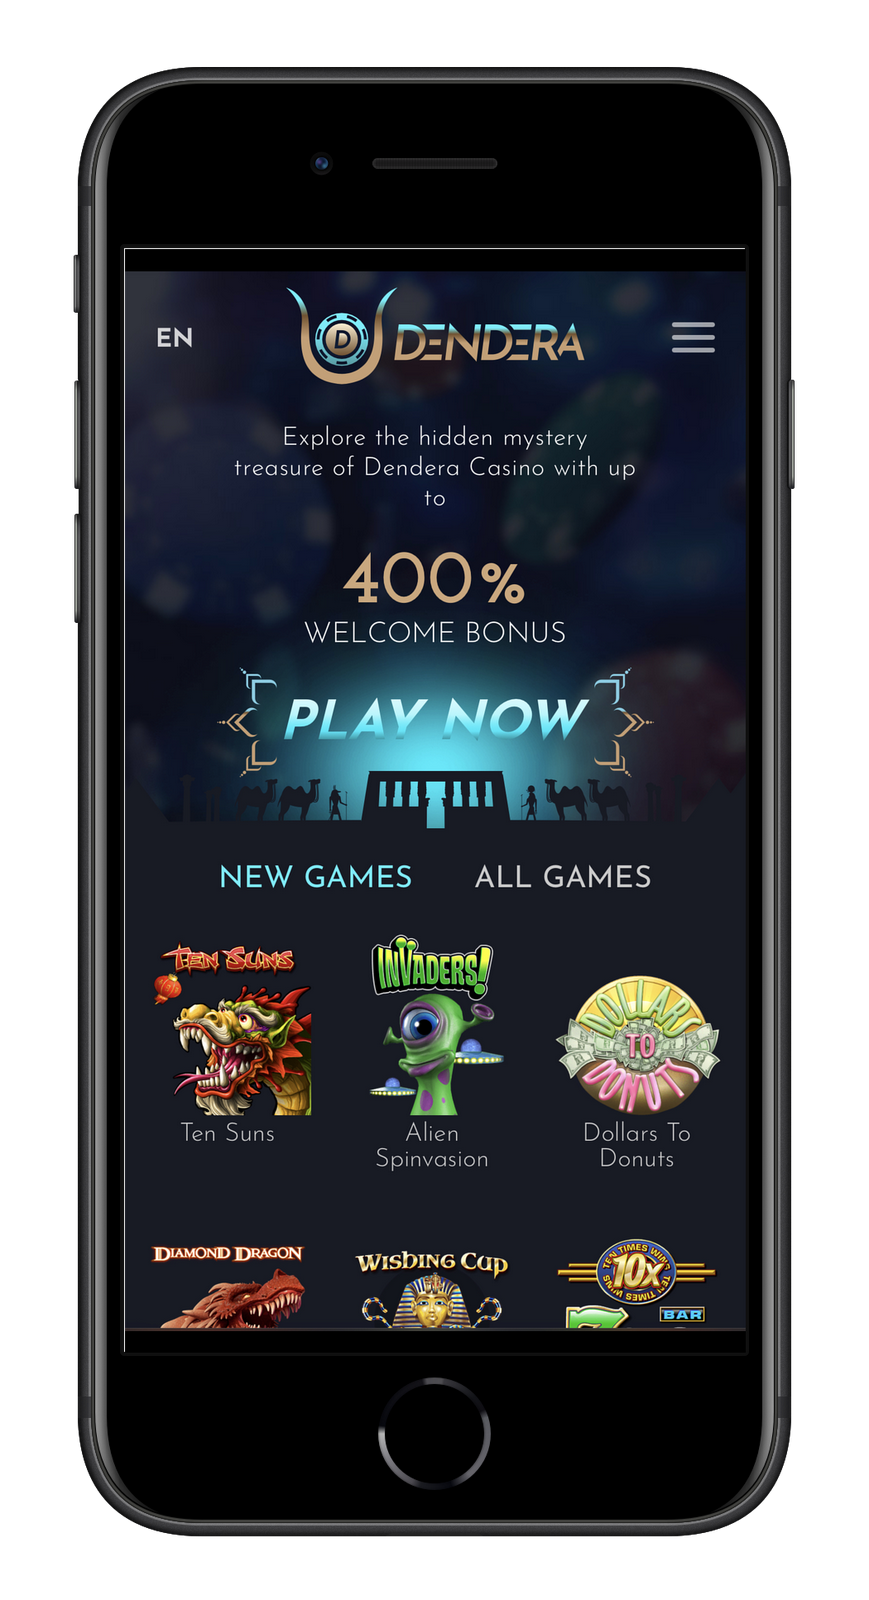 A buyer's guide to the dendera casino mobile app